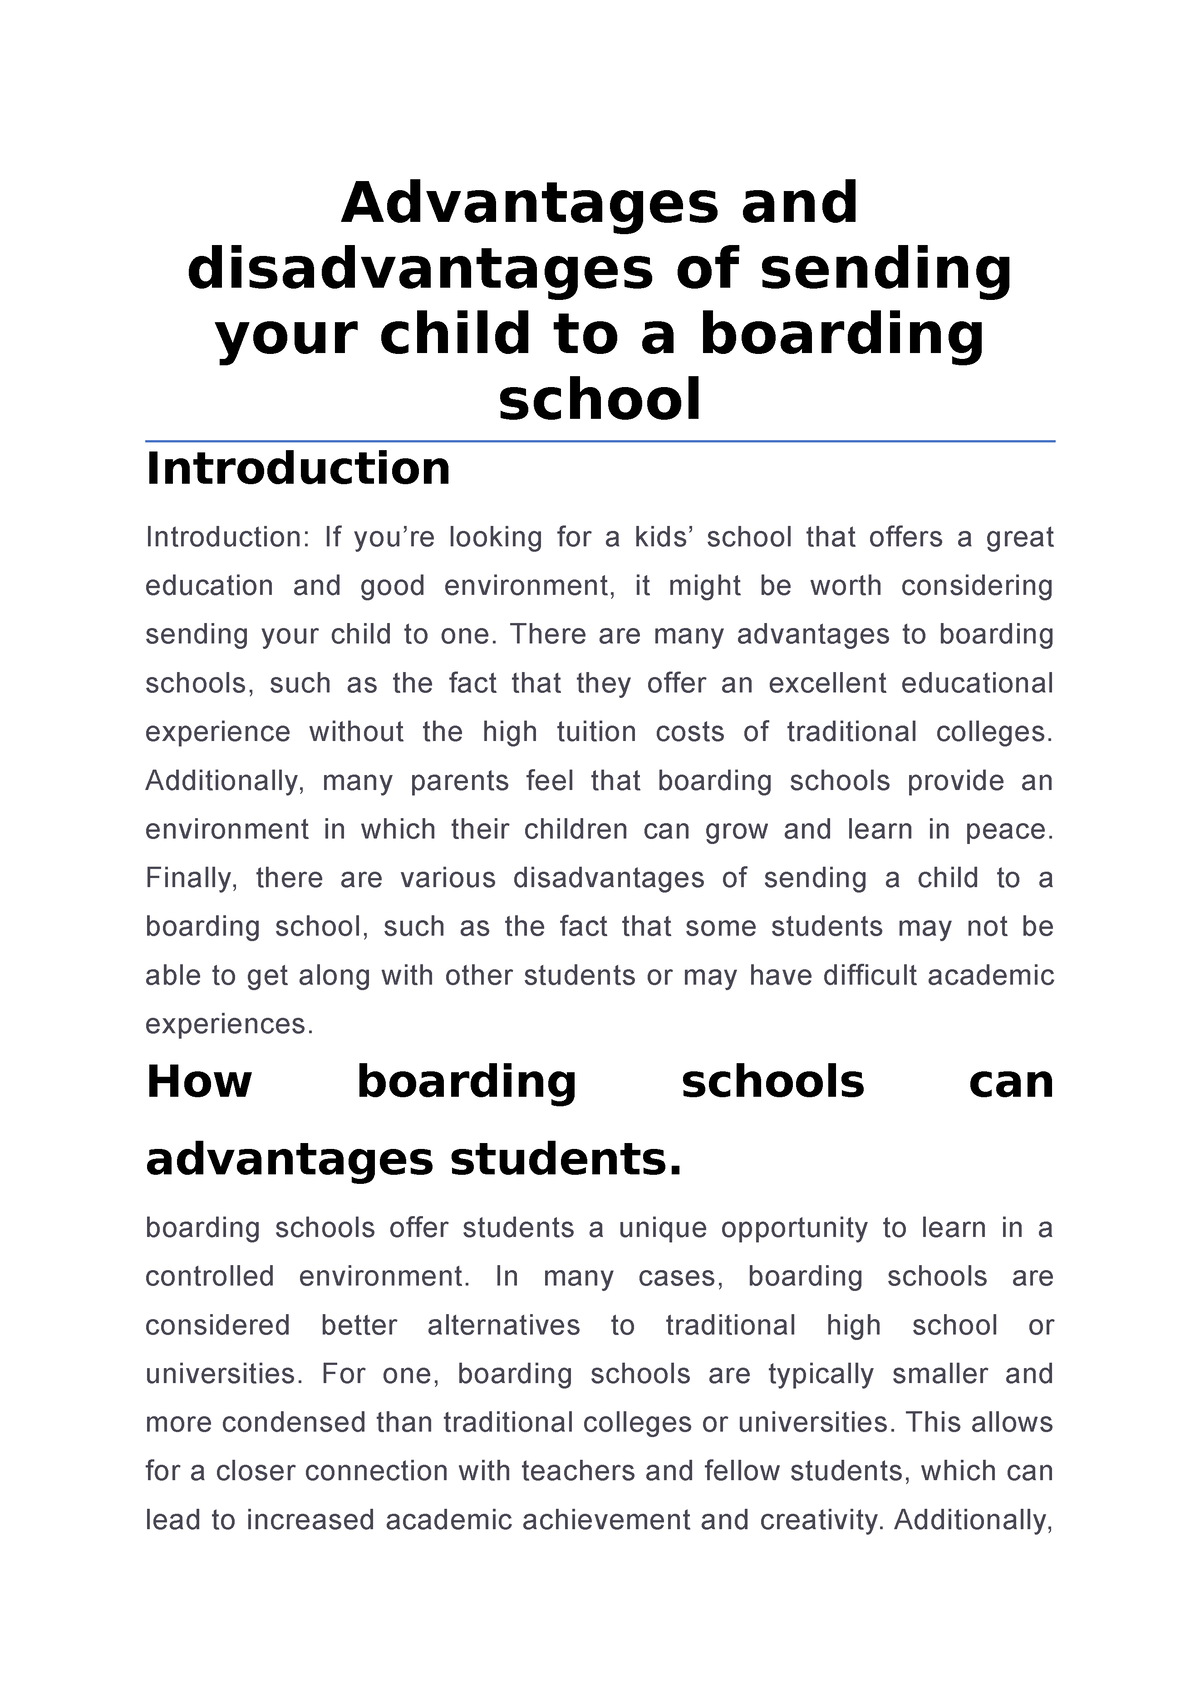 essay on advantages and disadvantages of boarding school